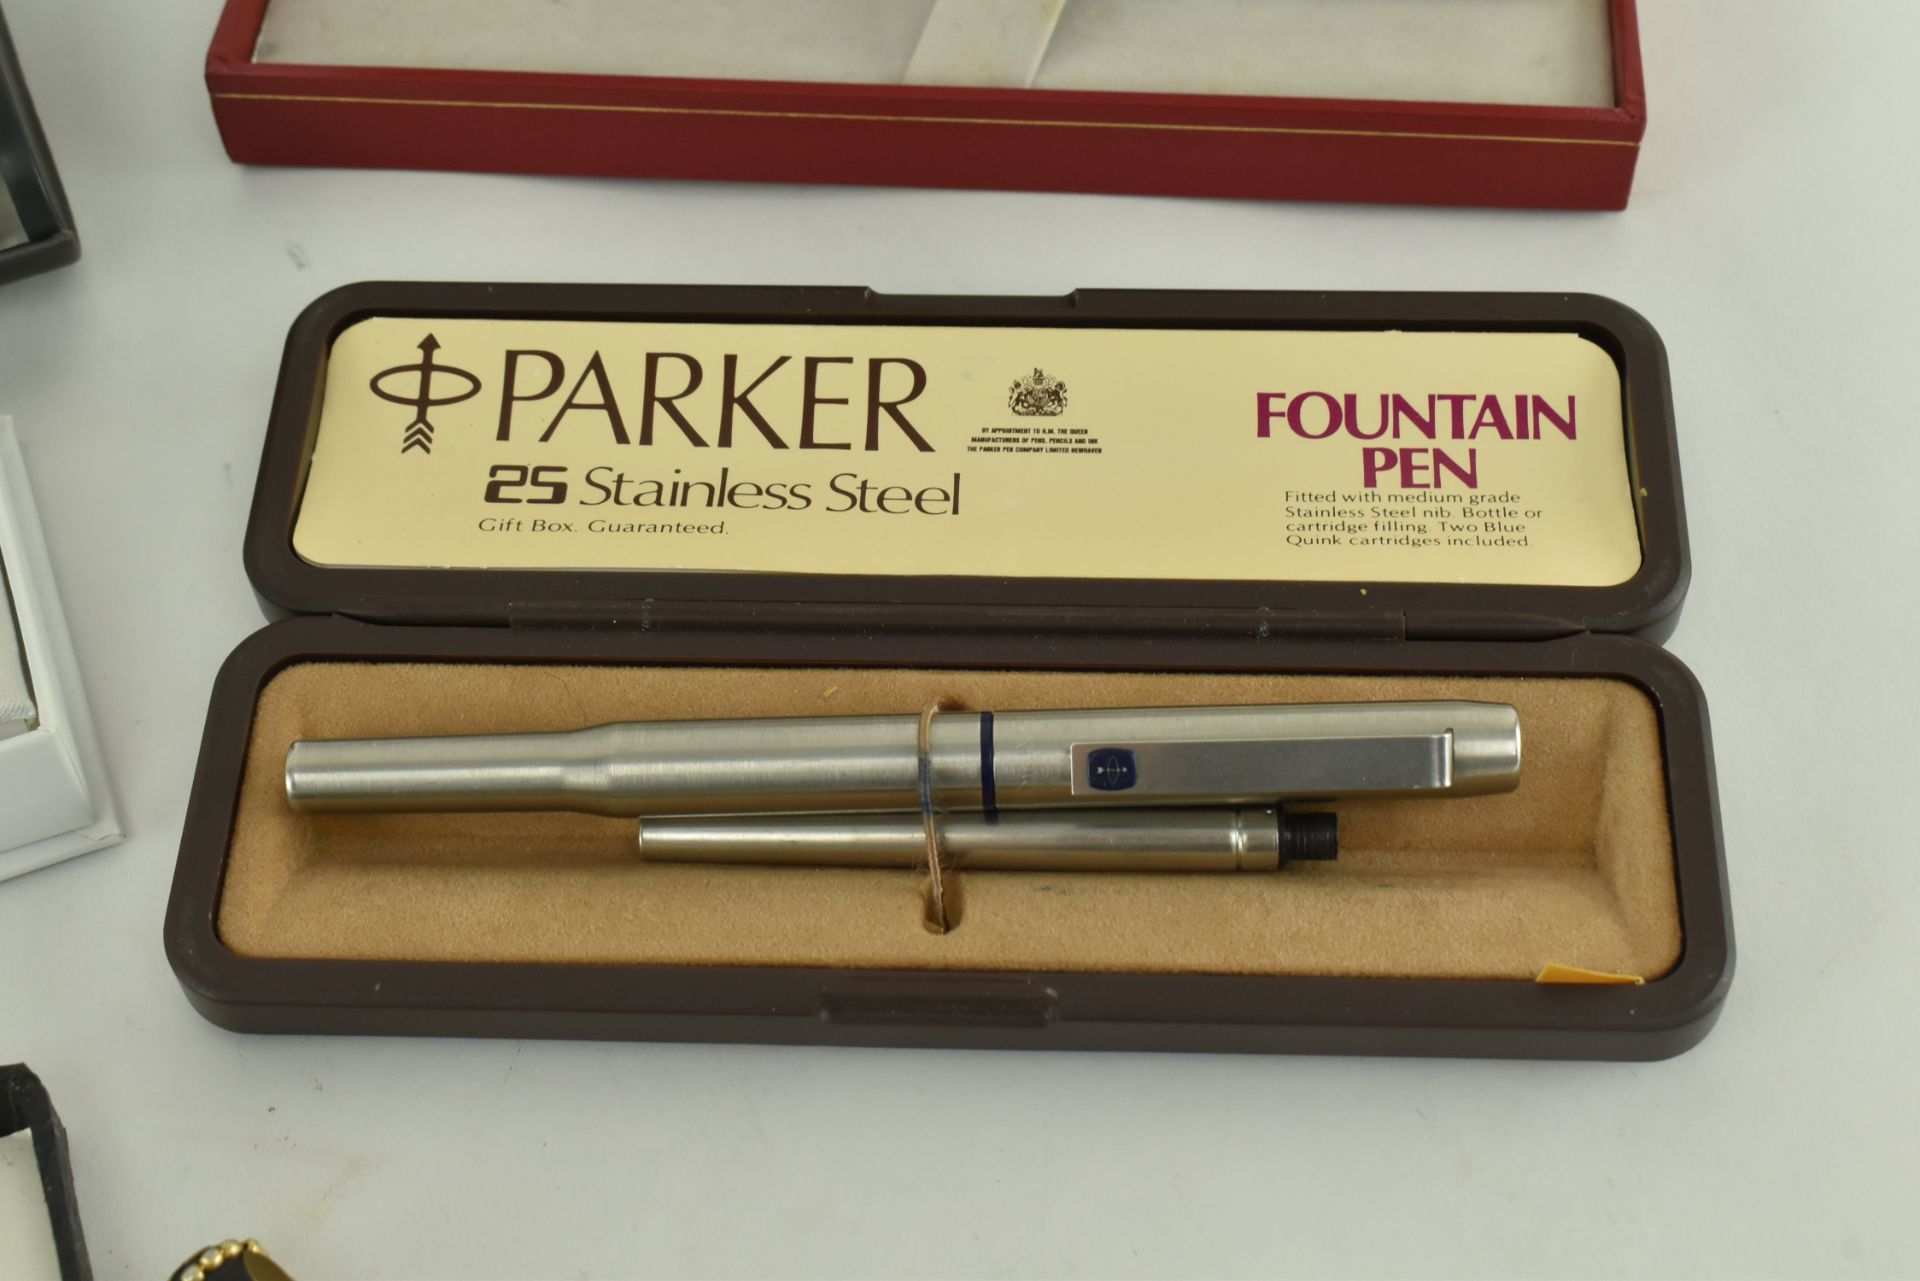 COLLECTION OF VINTAGE FOUNTAIN PENS INCL. PARKER & SHEAFFER - Image 5 of 9